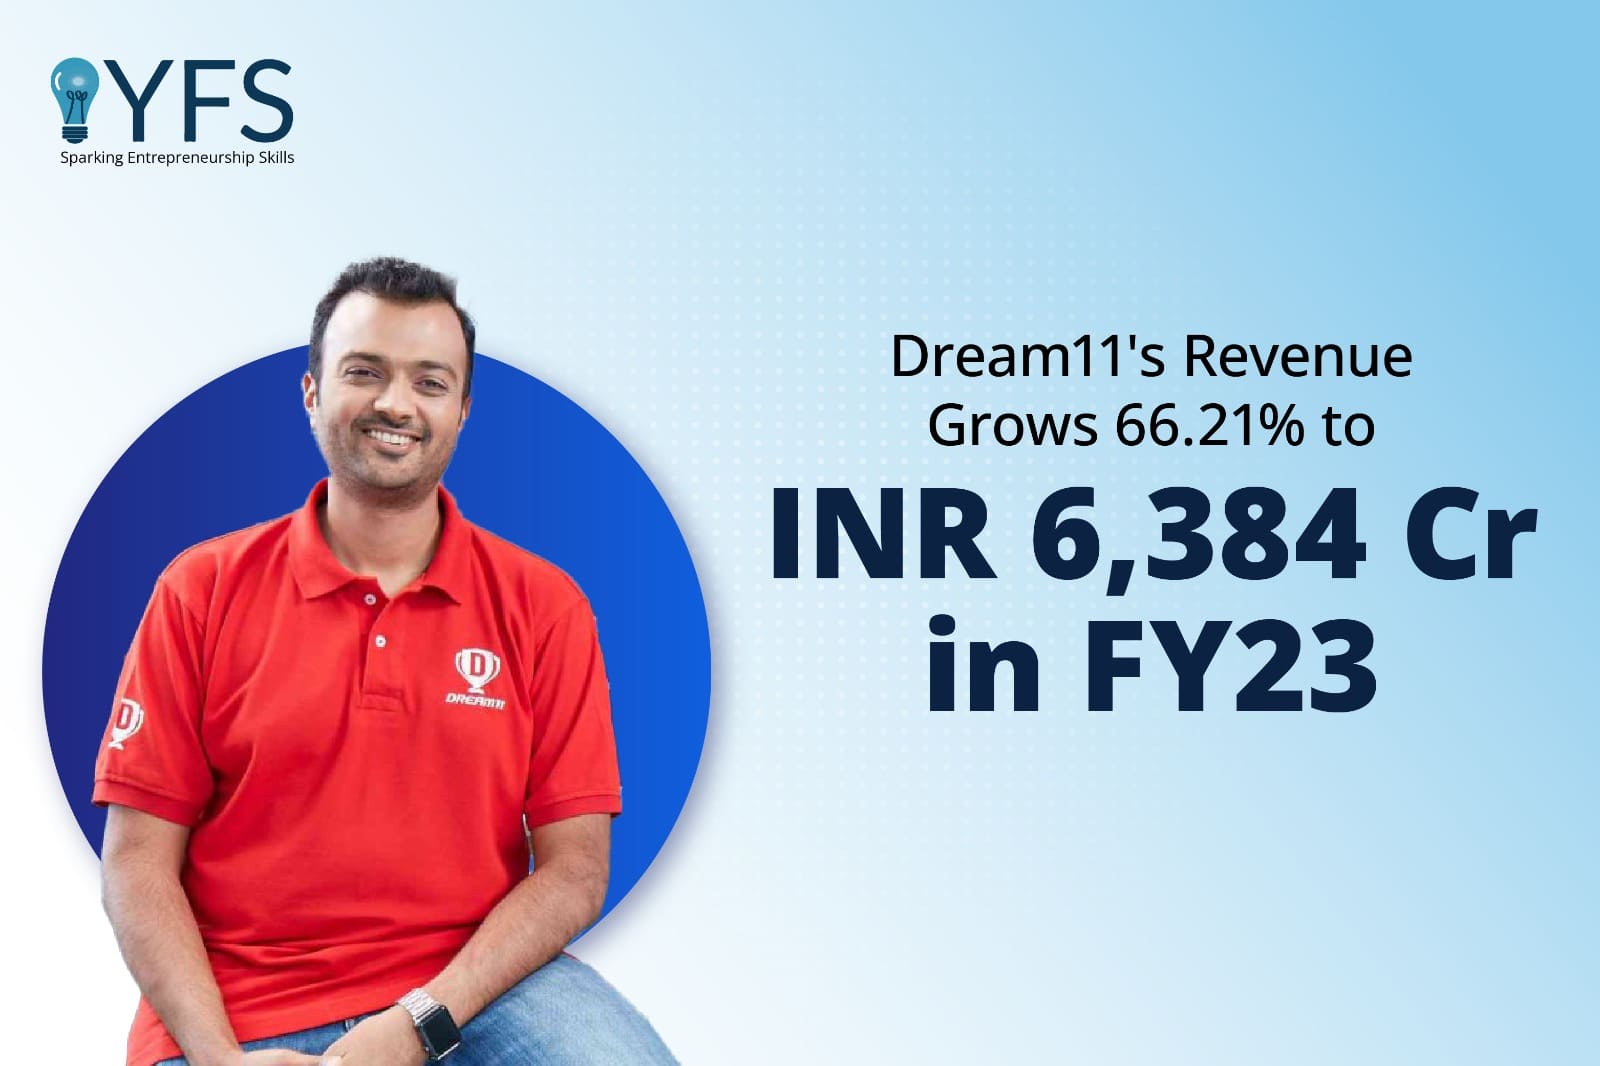 Dream11's Revenue Grows 66.21% to INR 6,384 Cr in FY23